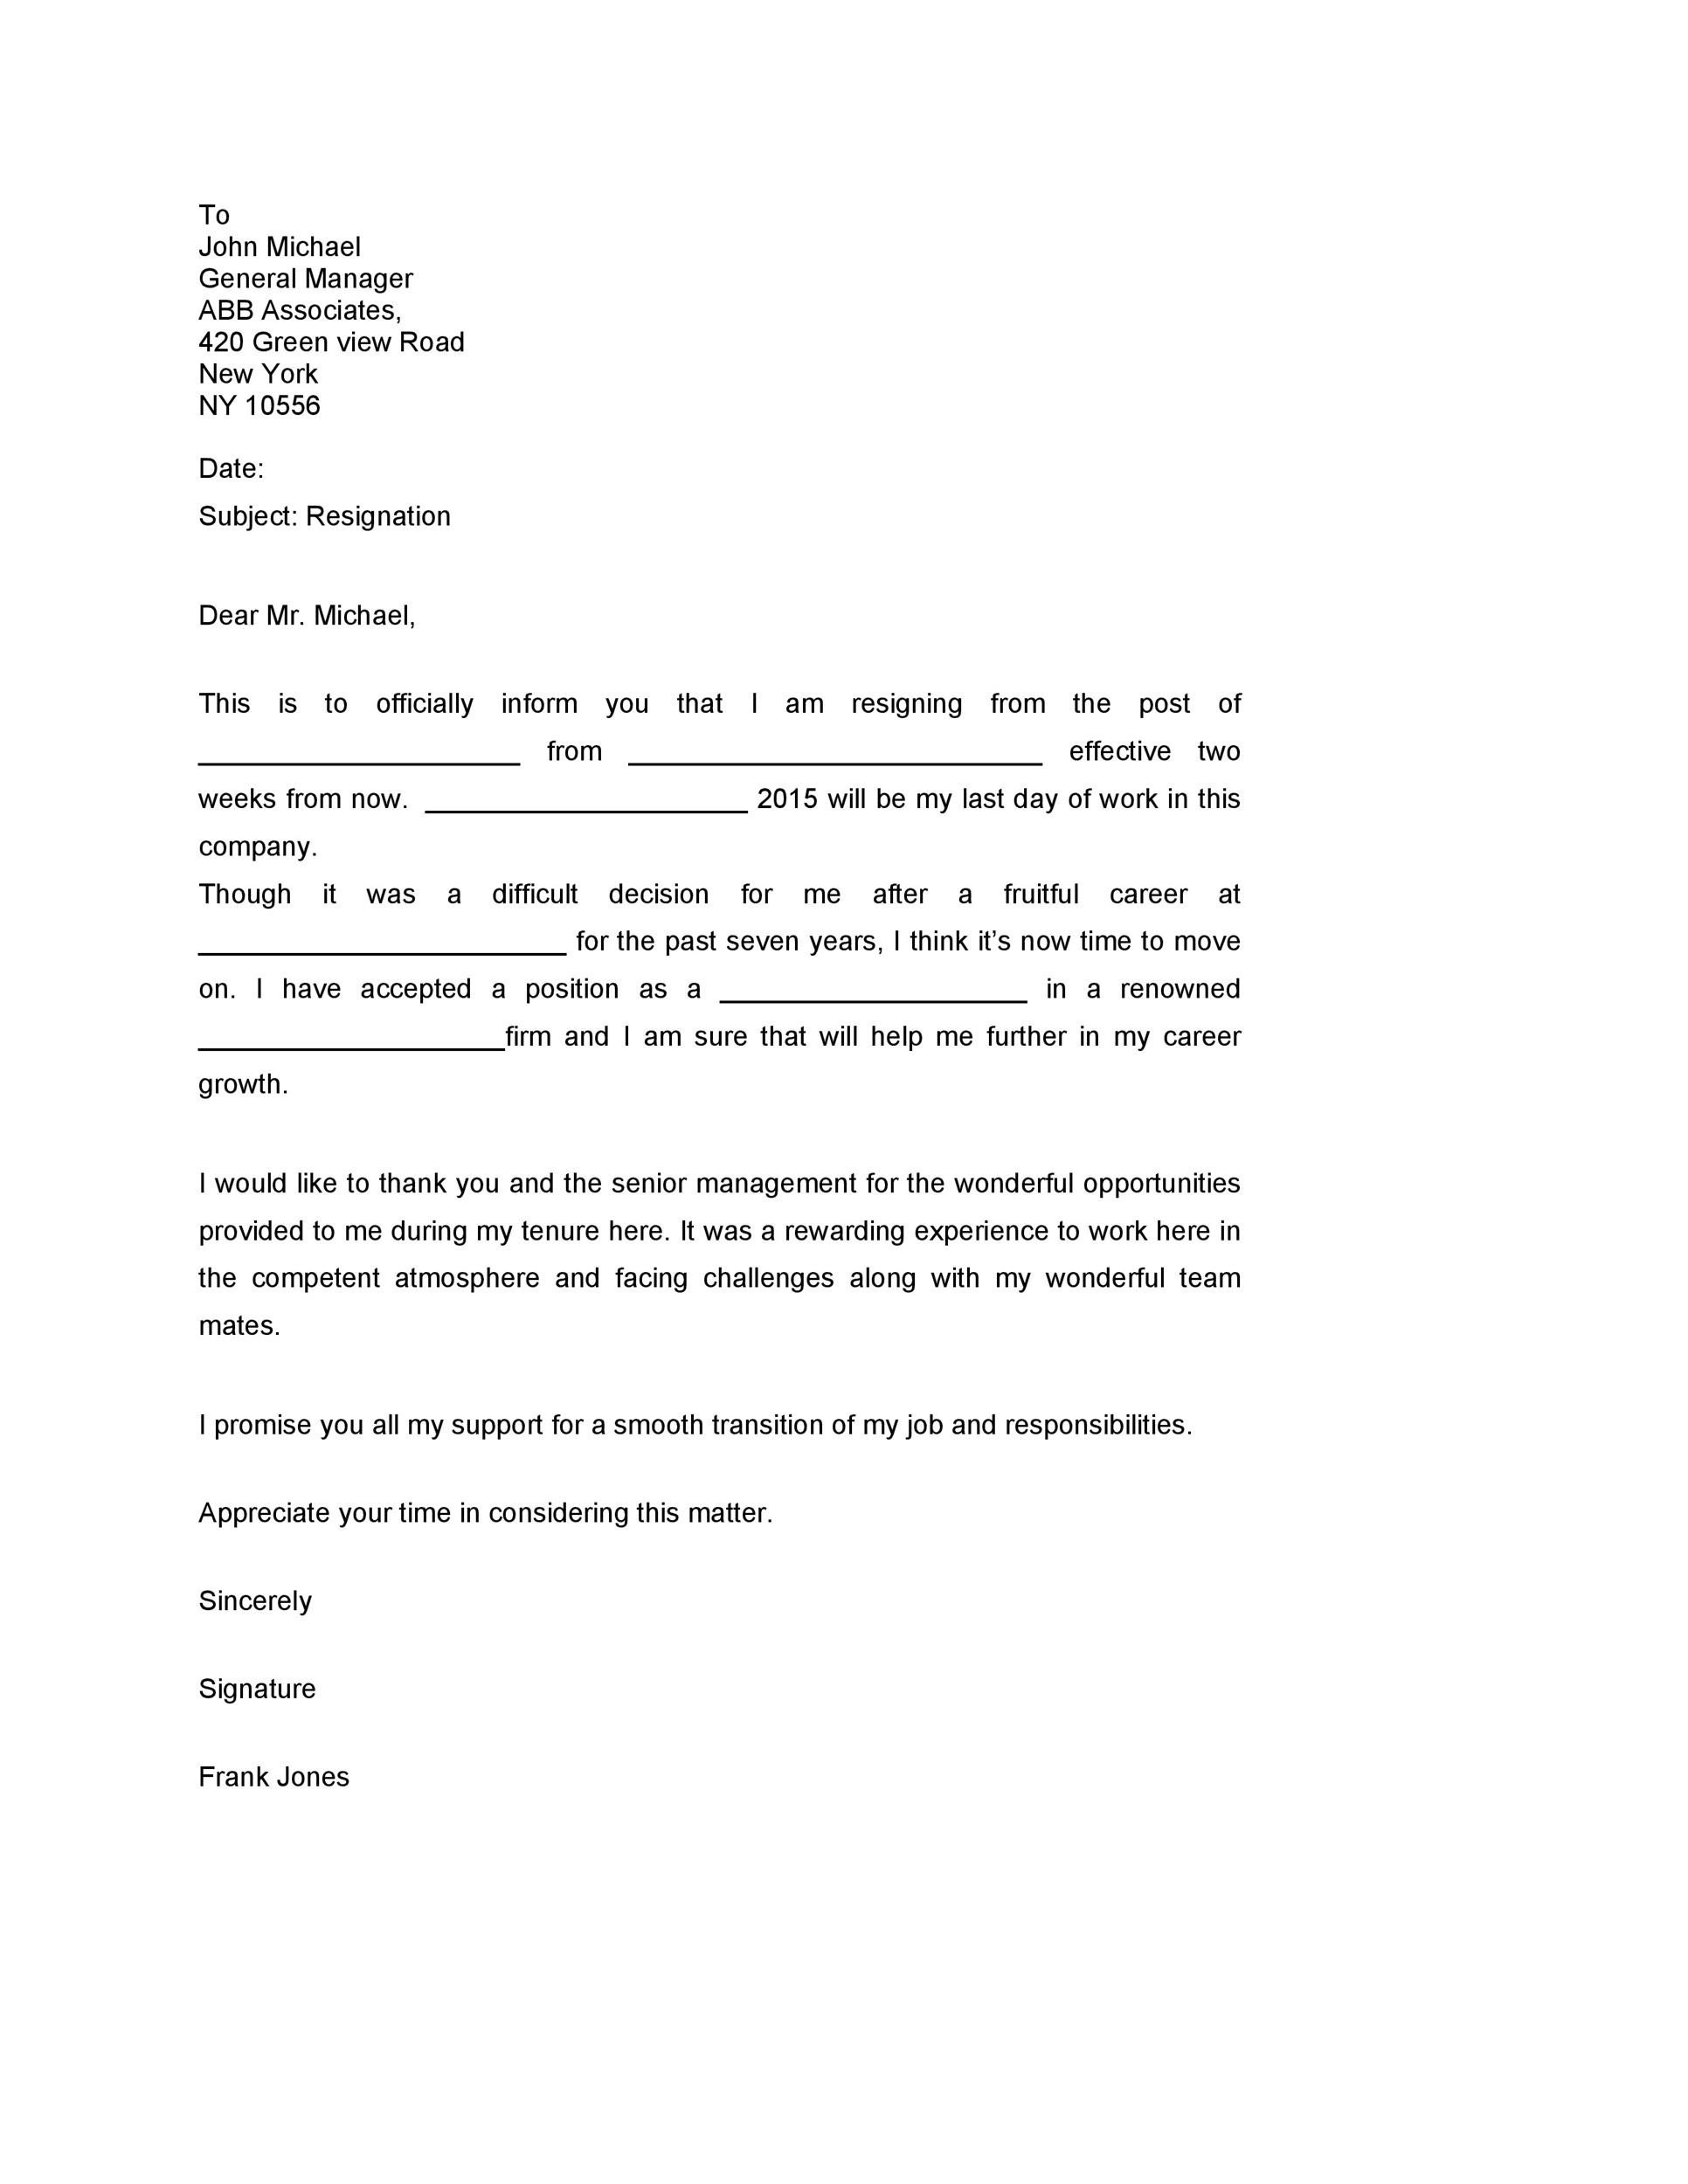 7 Days Notice Resignation Letter from templatelab.com